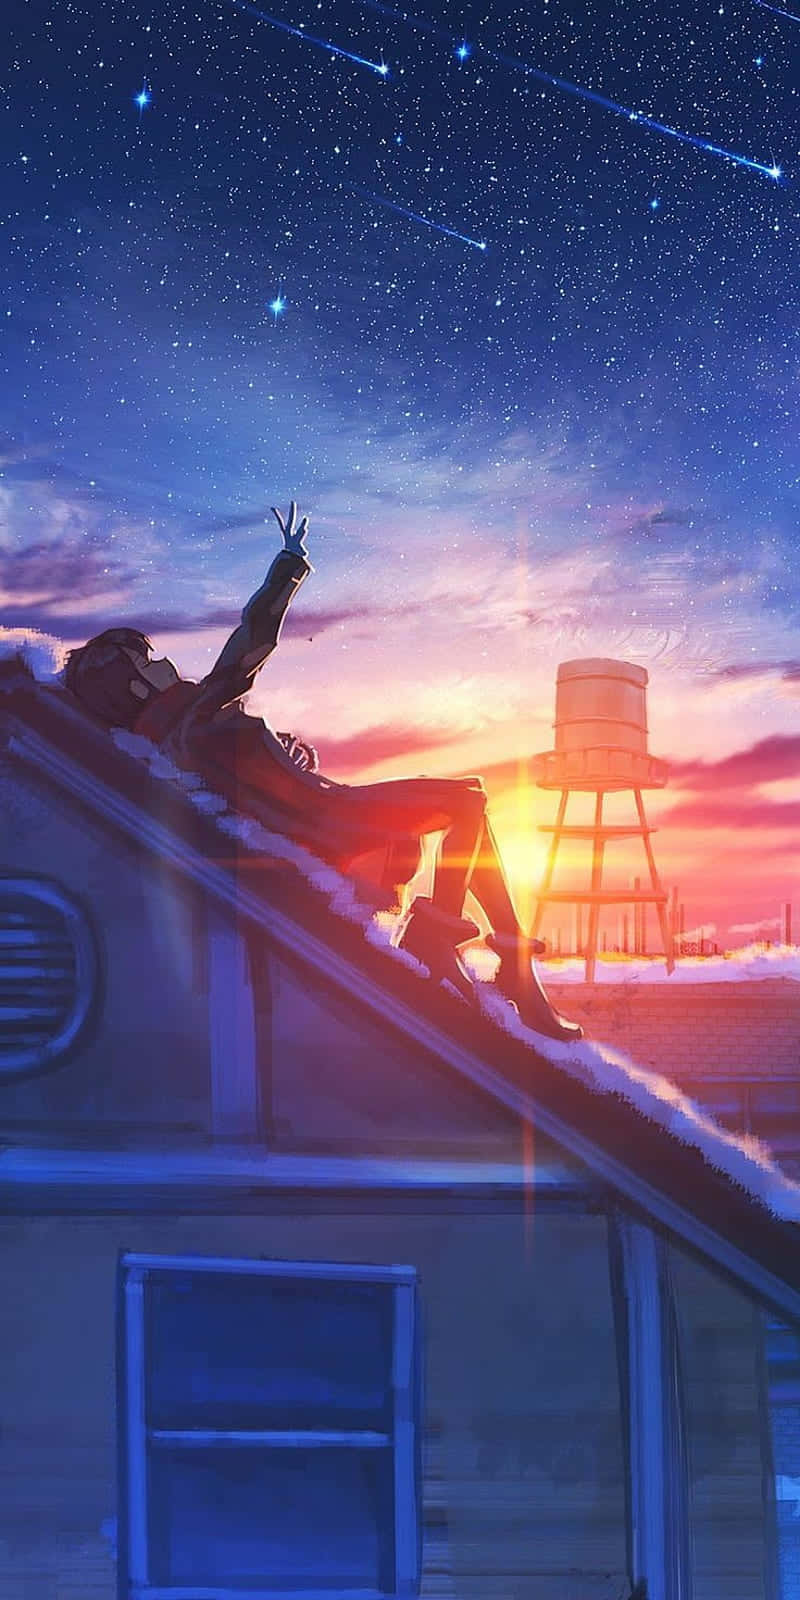 Download Anime Sunset Iphone Wallpaper | Wallpapers.com